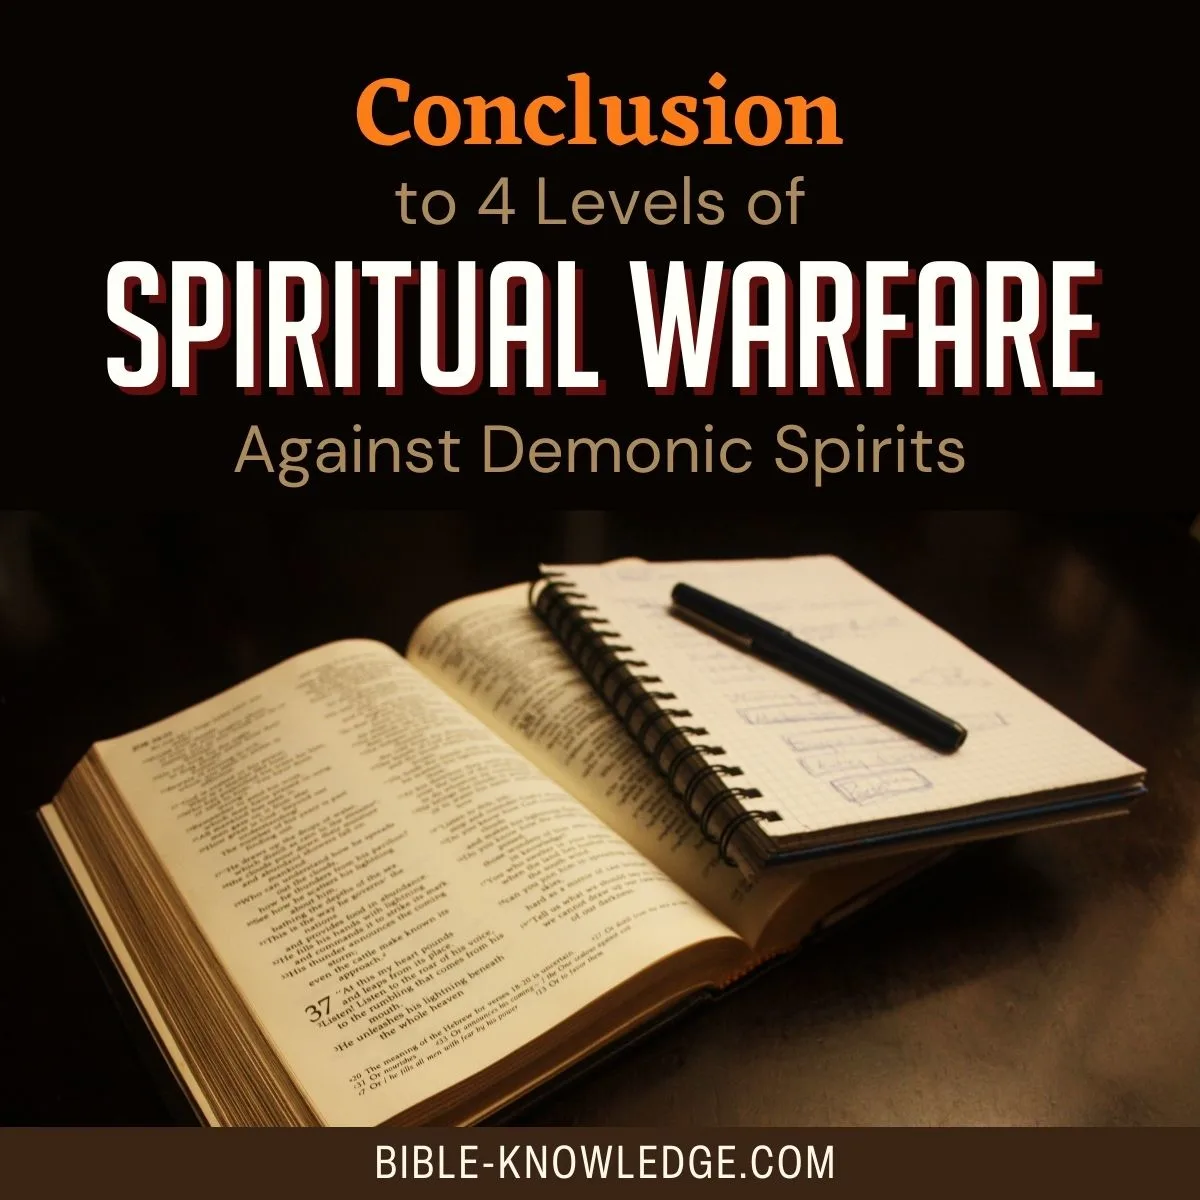 Conclusion to 4 Levels of Spiritual Warfare Against Demonic Spirits